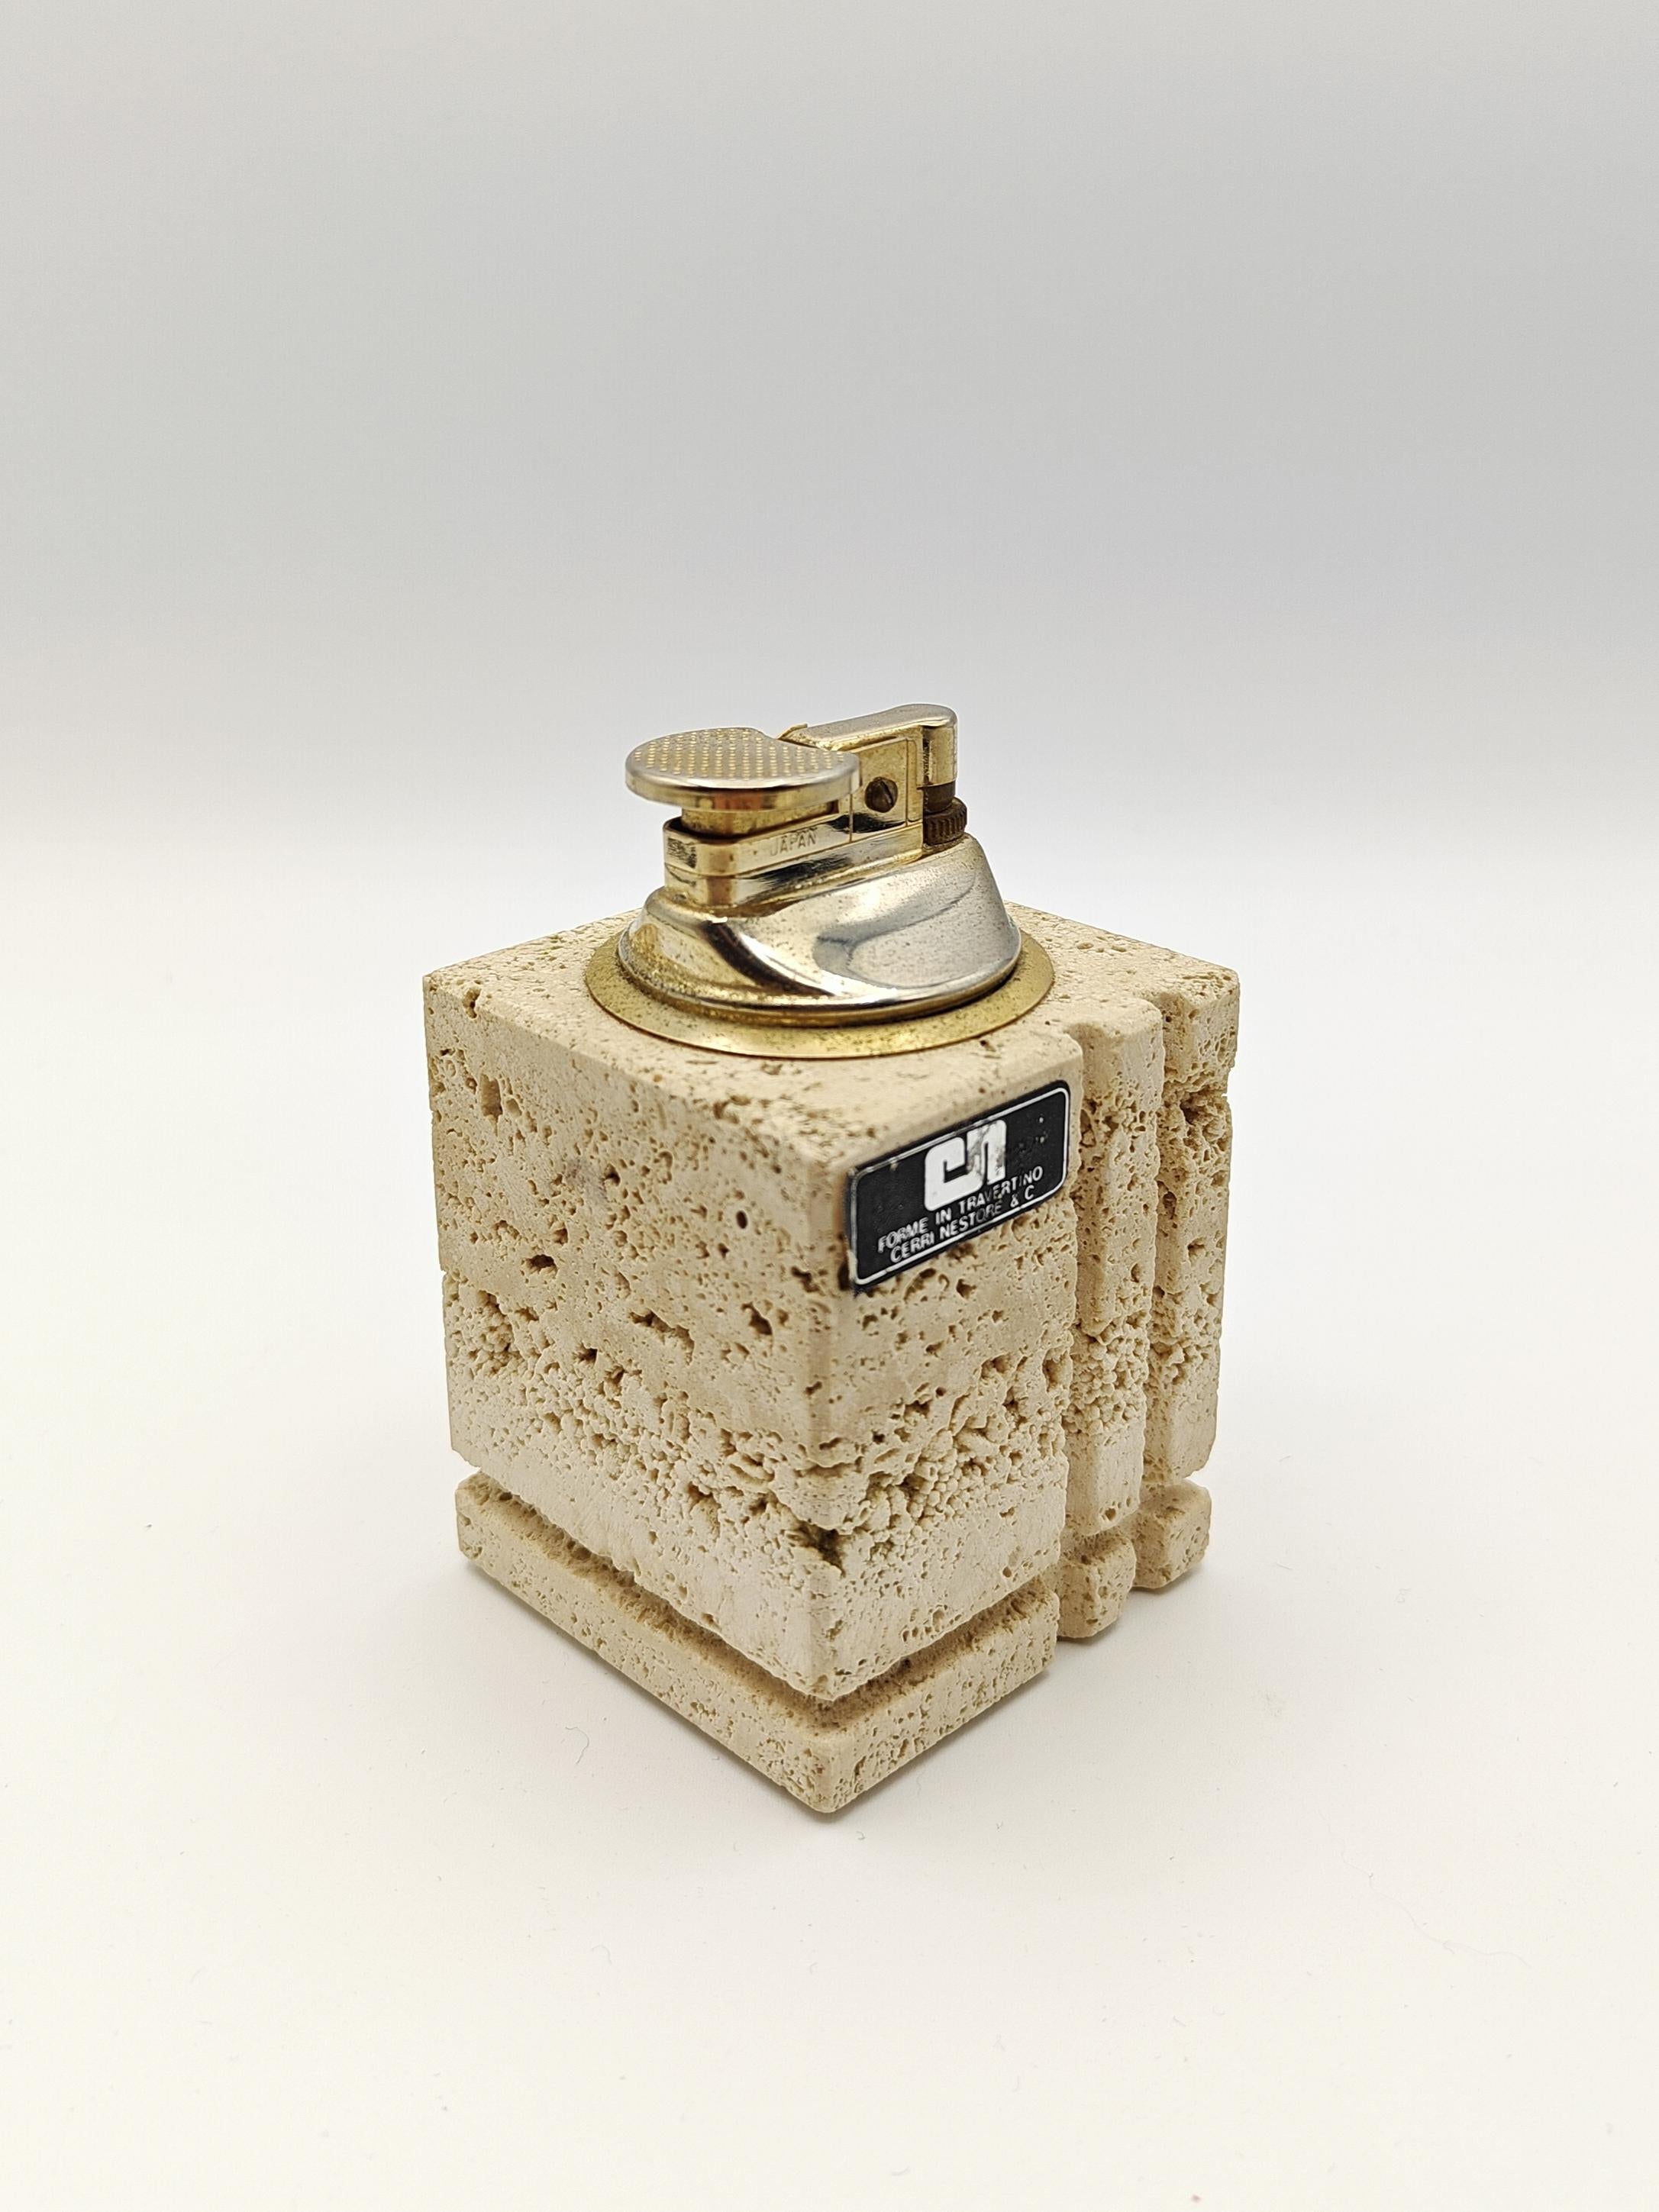 Iconic table lighter from the 70s in travertine and brass. This table or desk accessory is totally functional. The small reservoir of this lighter can be easily removed to facilitate the refilling of butane gas or Zippo gas. Of Italian origin, but